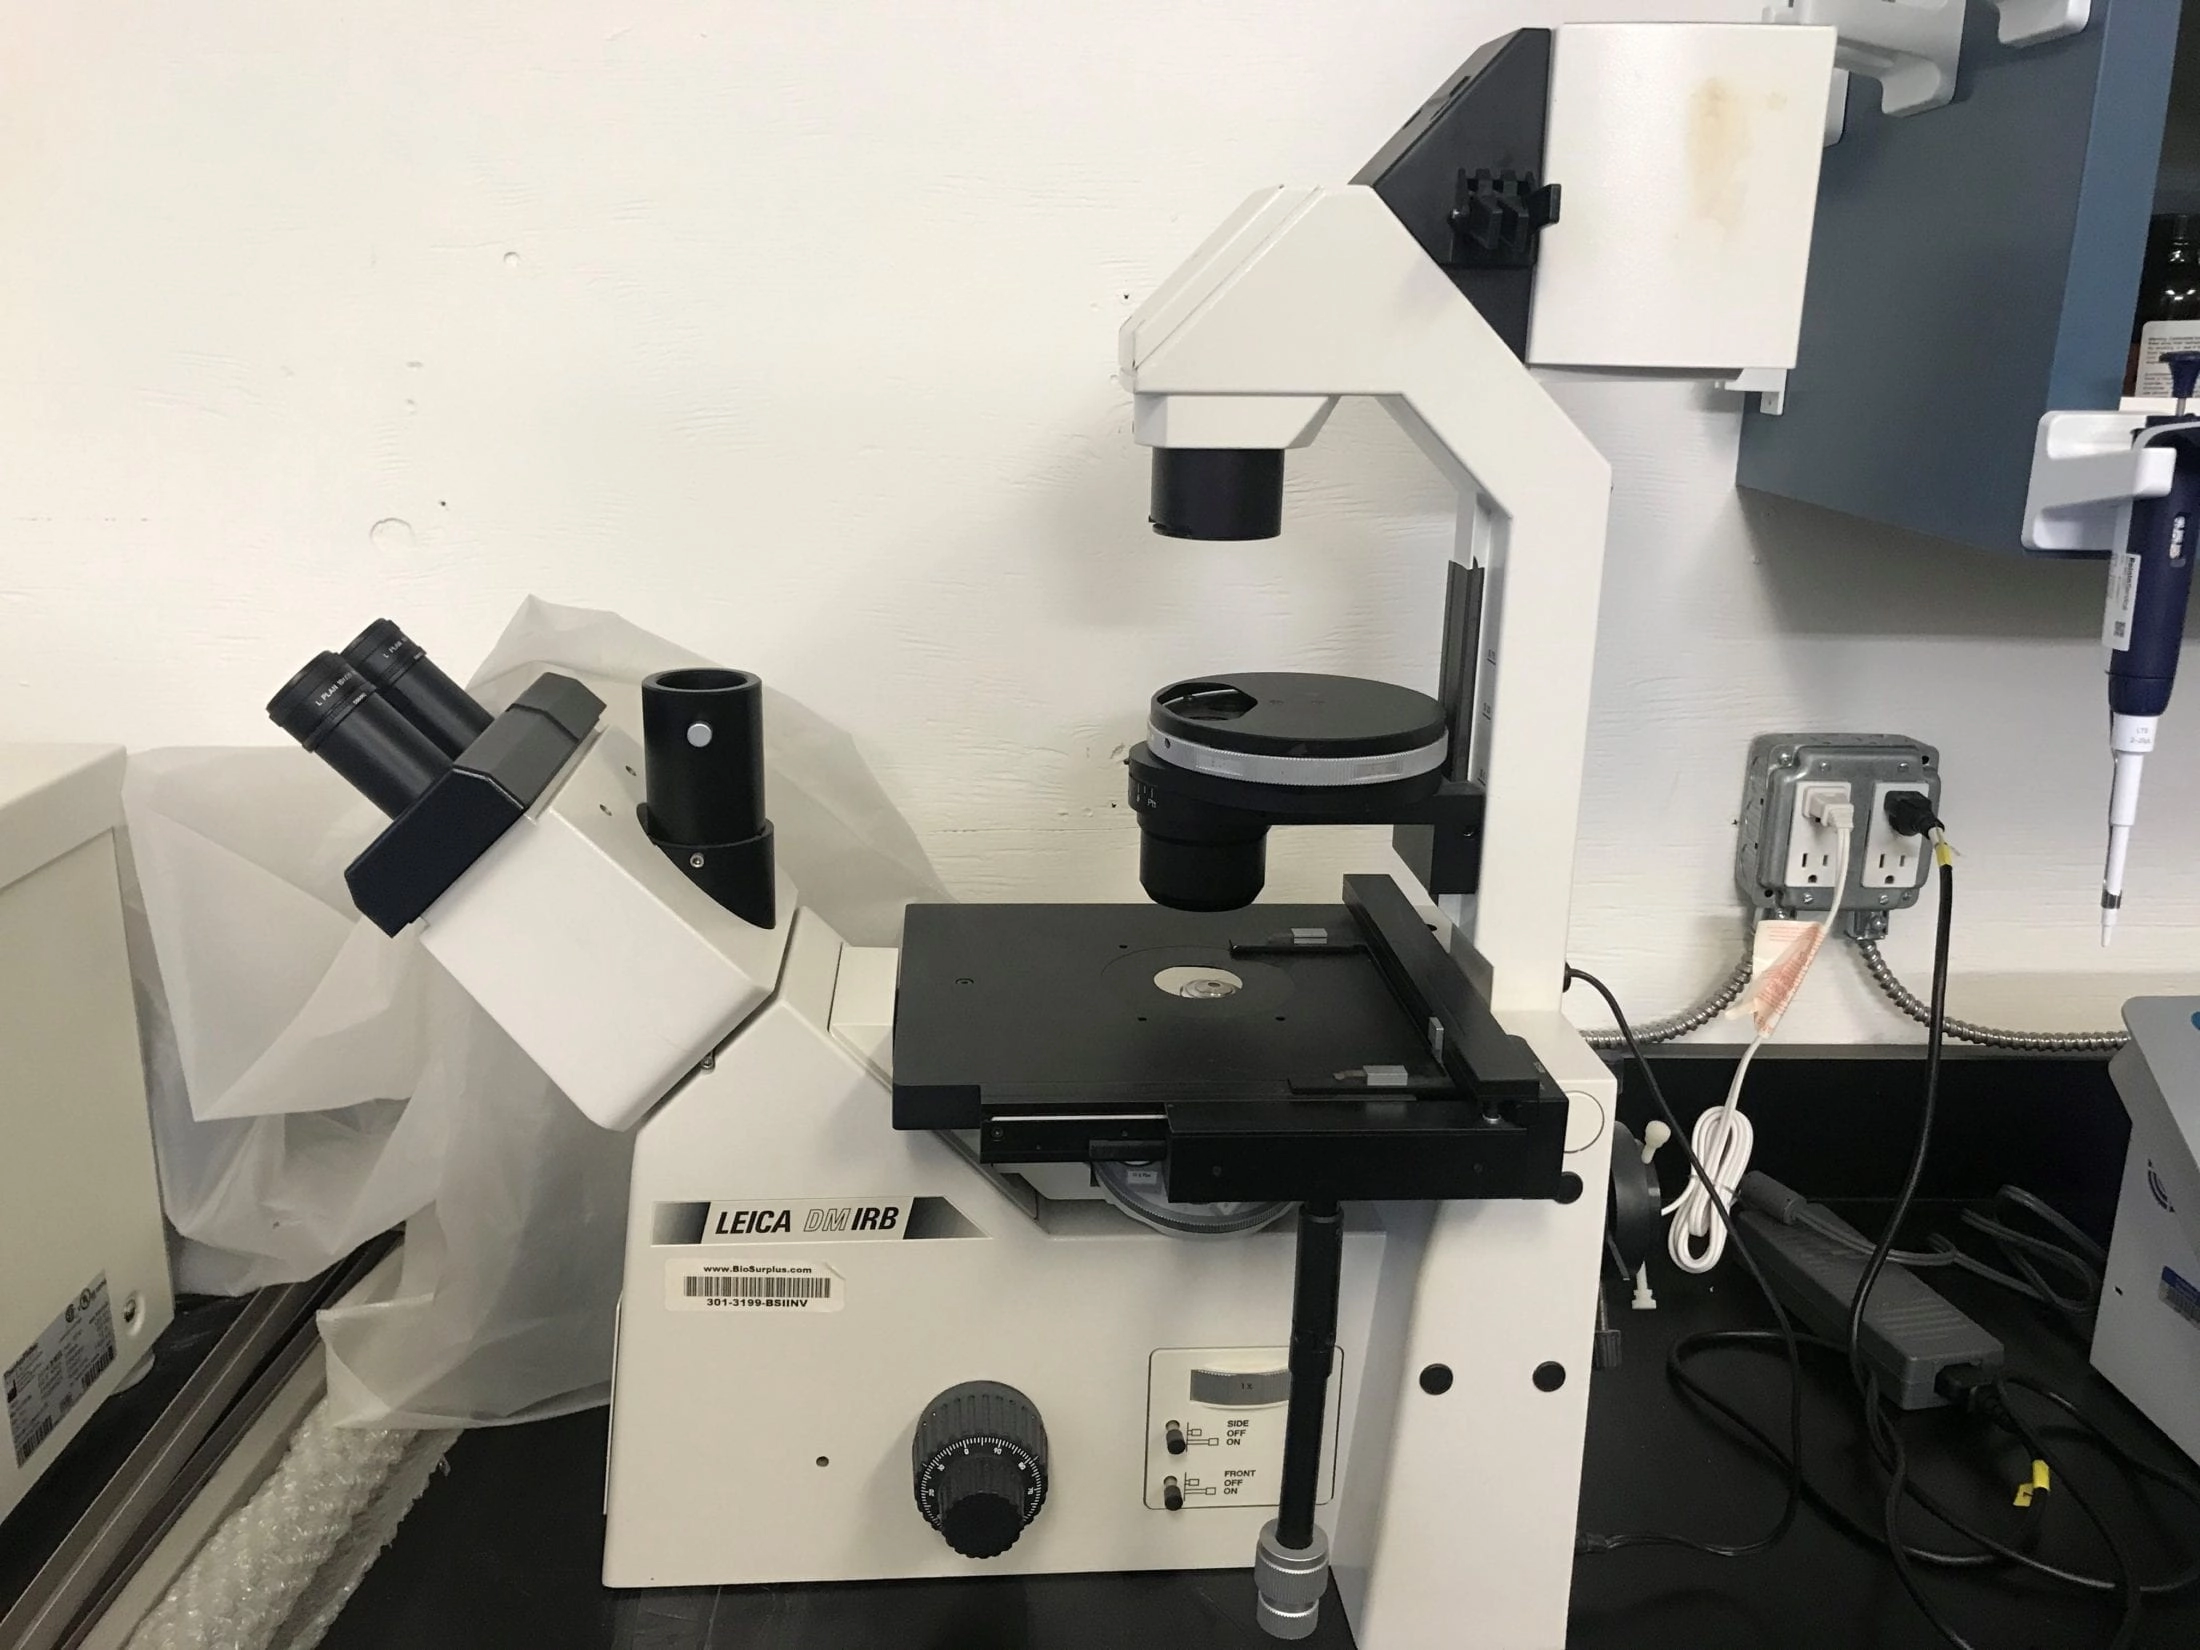 Leica Inverted Phase Contrast Microscope DM-IRB